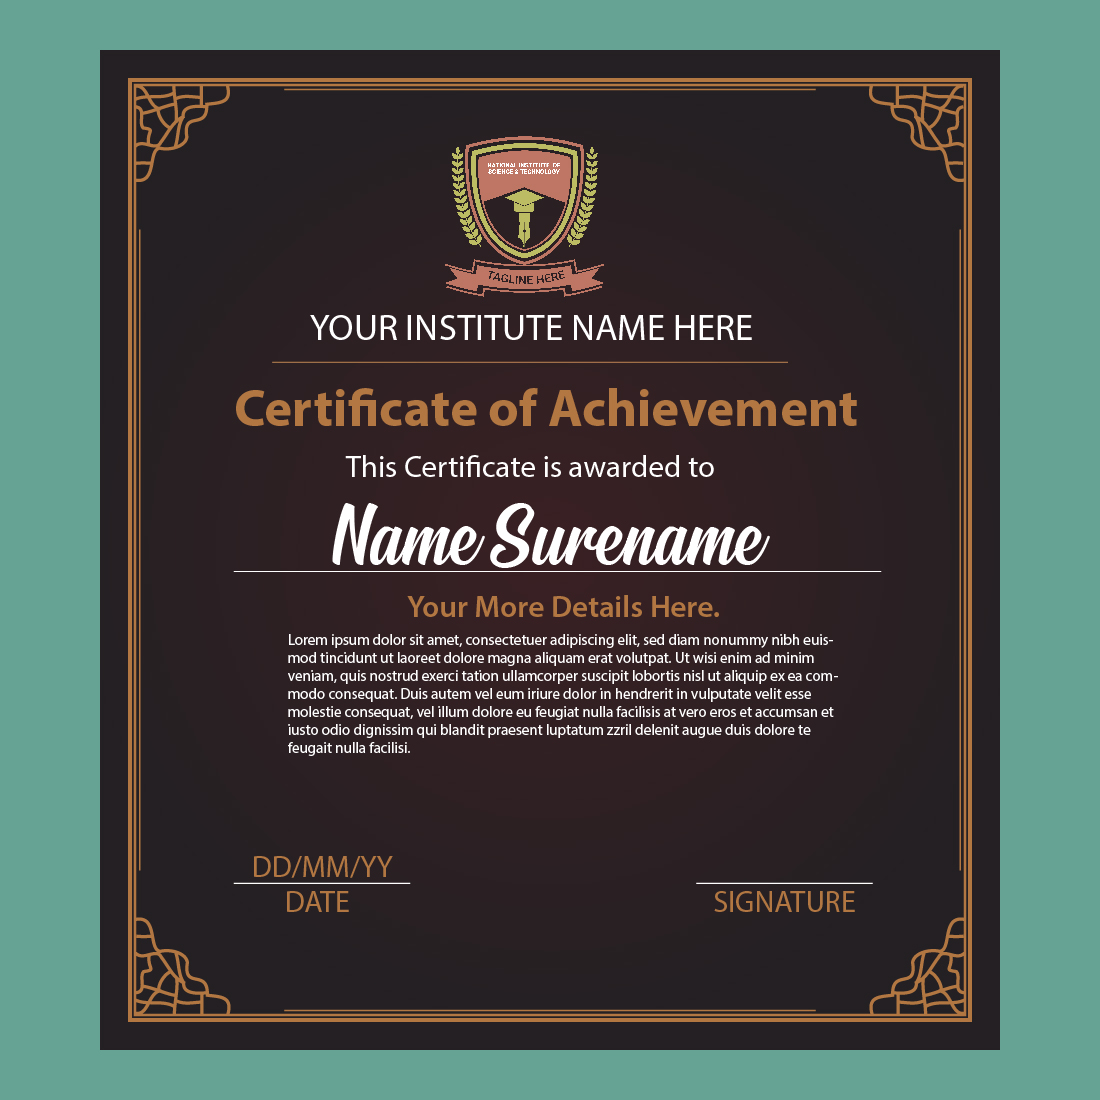 School, academy or any educational institute certificate template design preview image.